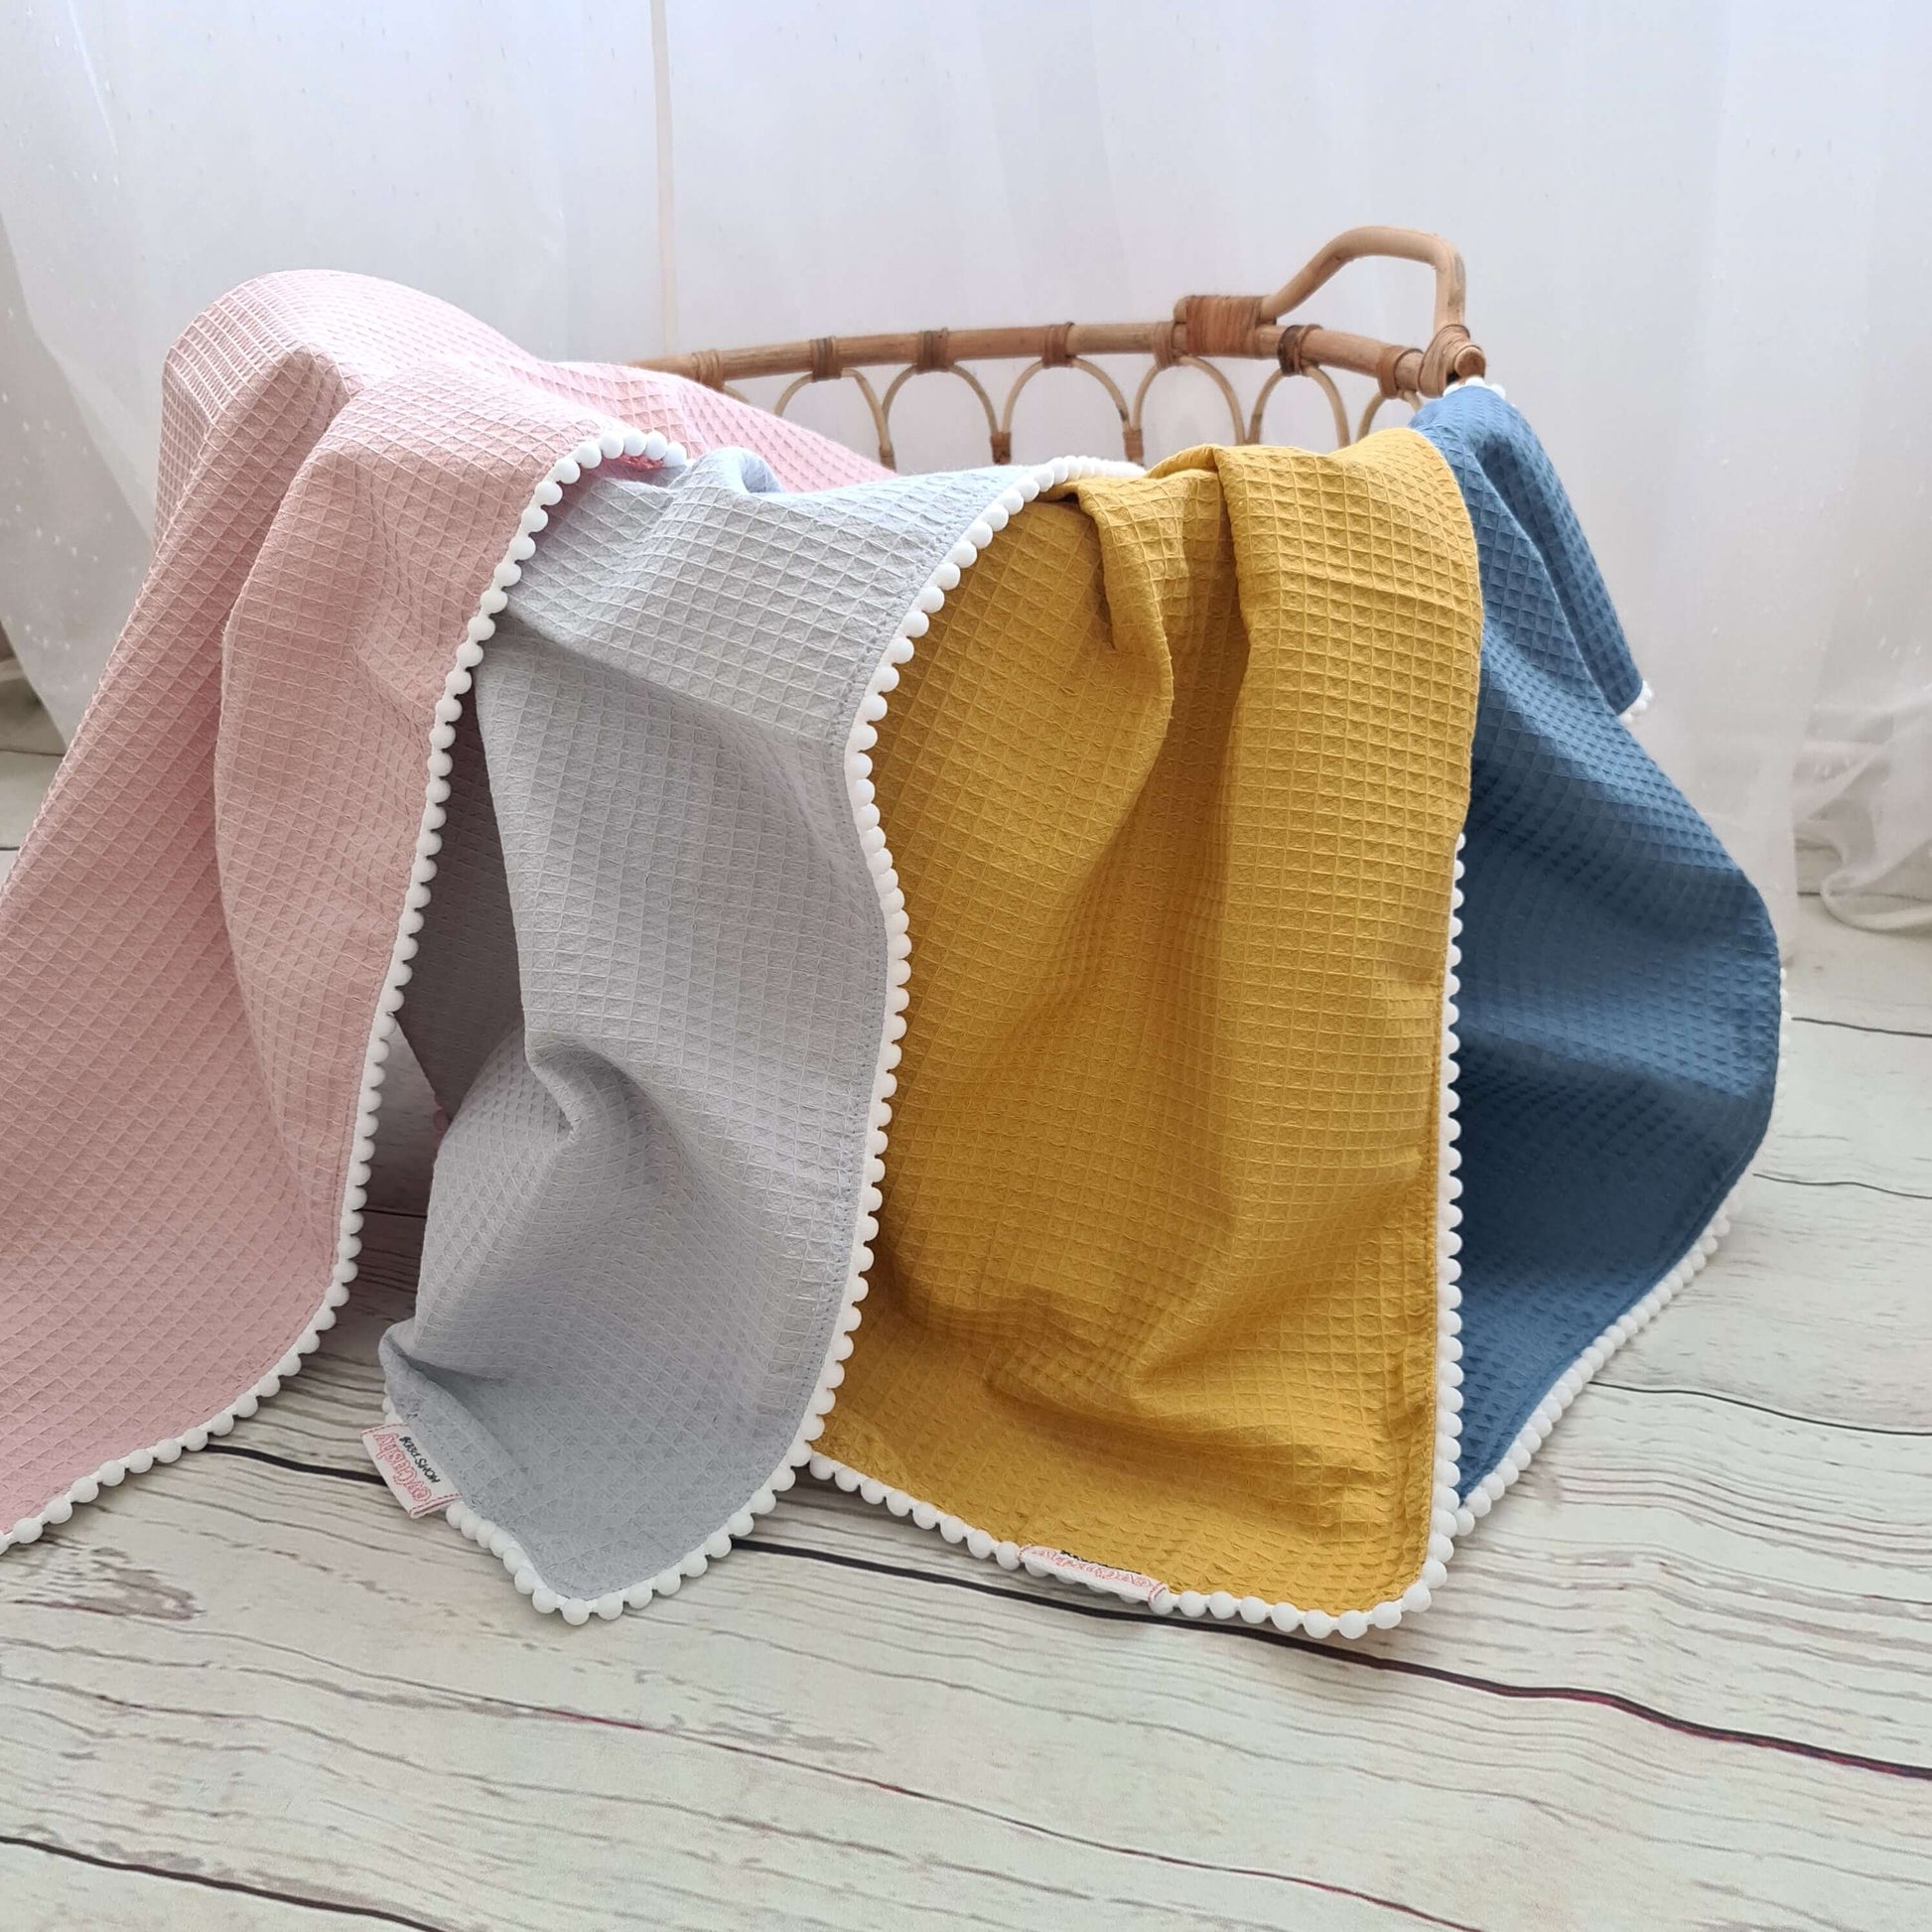 100% cotton blankets for baby waffle texture blanket pink grey mustard blue